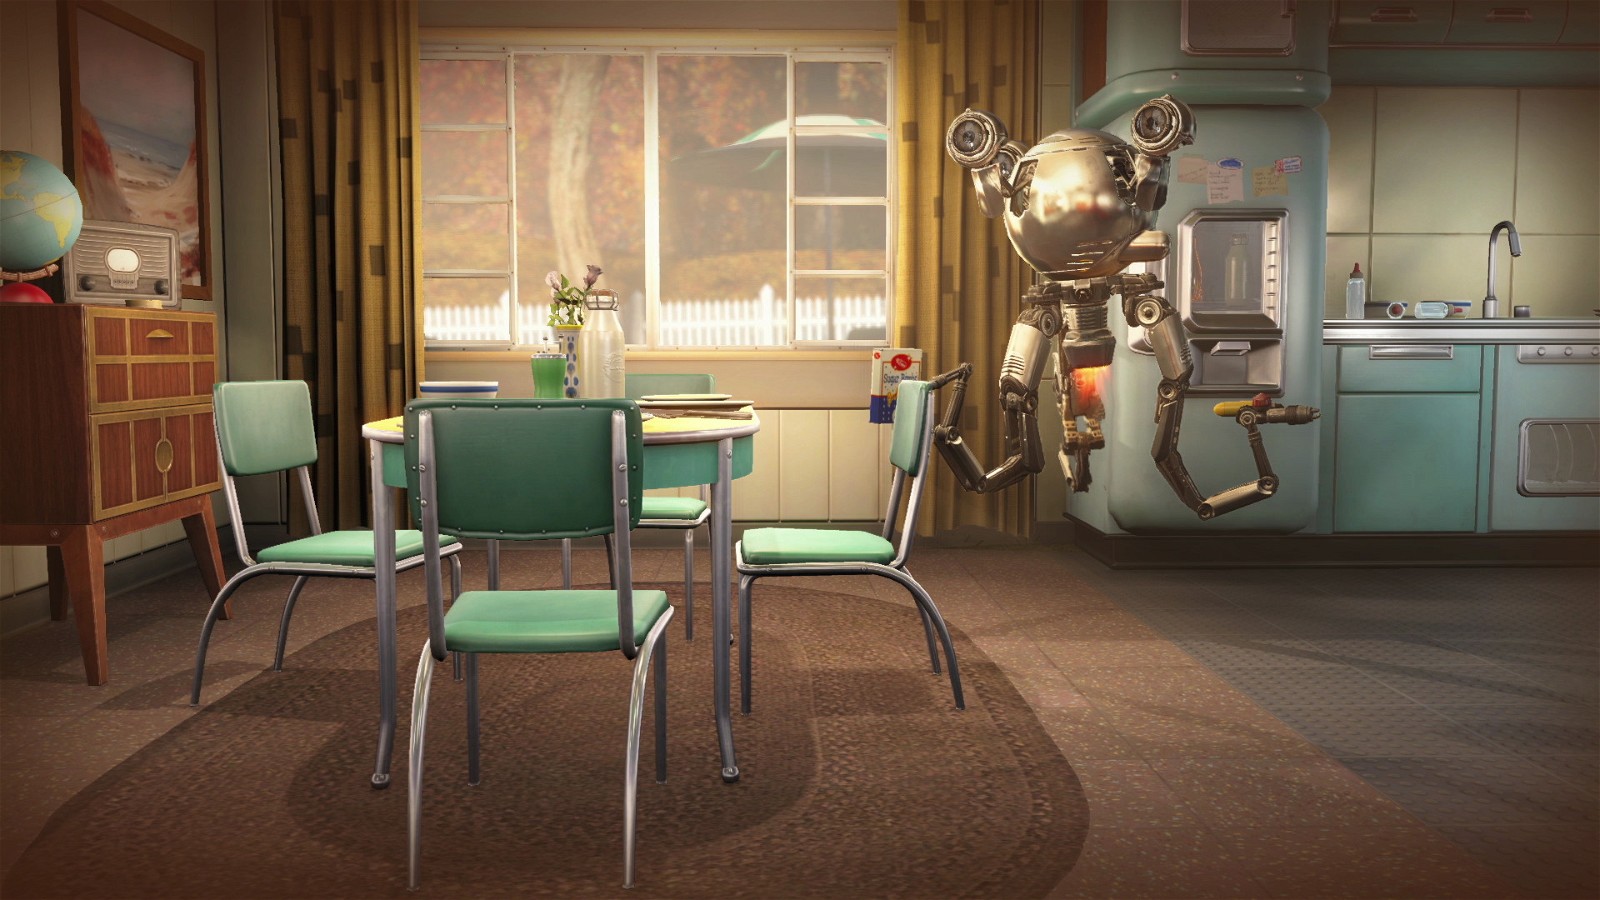 Fallout 4 stands as a testament to Bethesda's dedication to storytelling and engaging character development